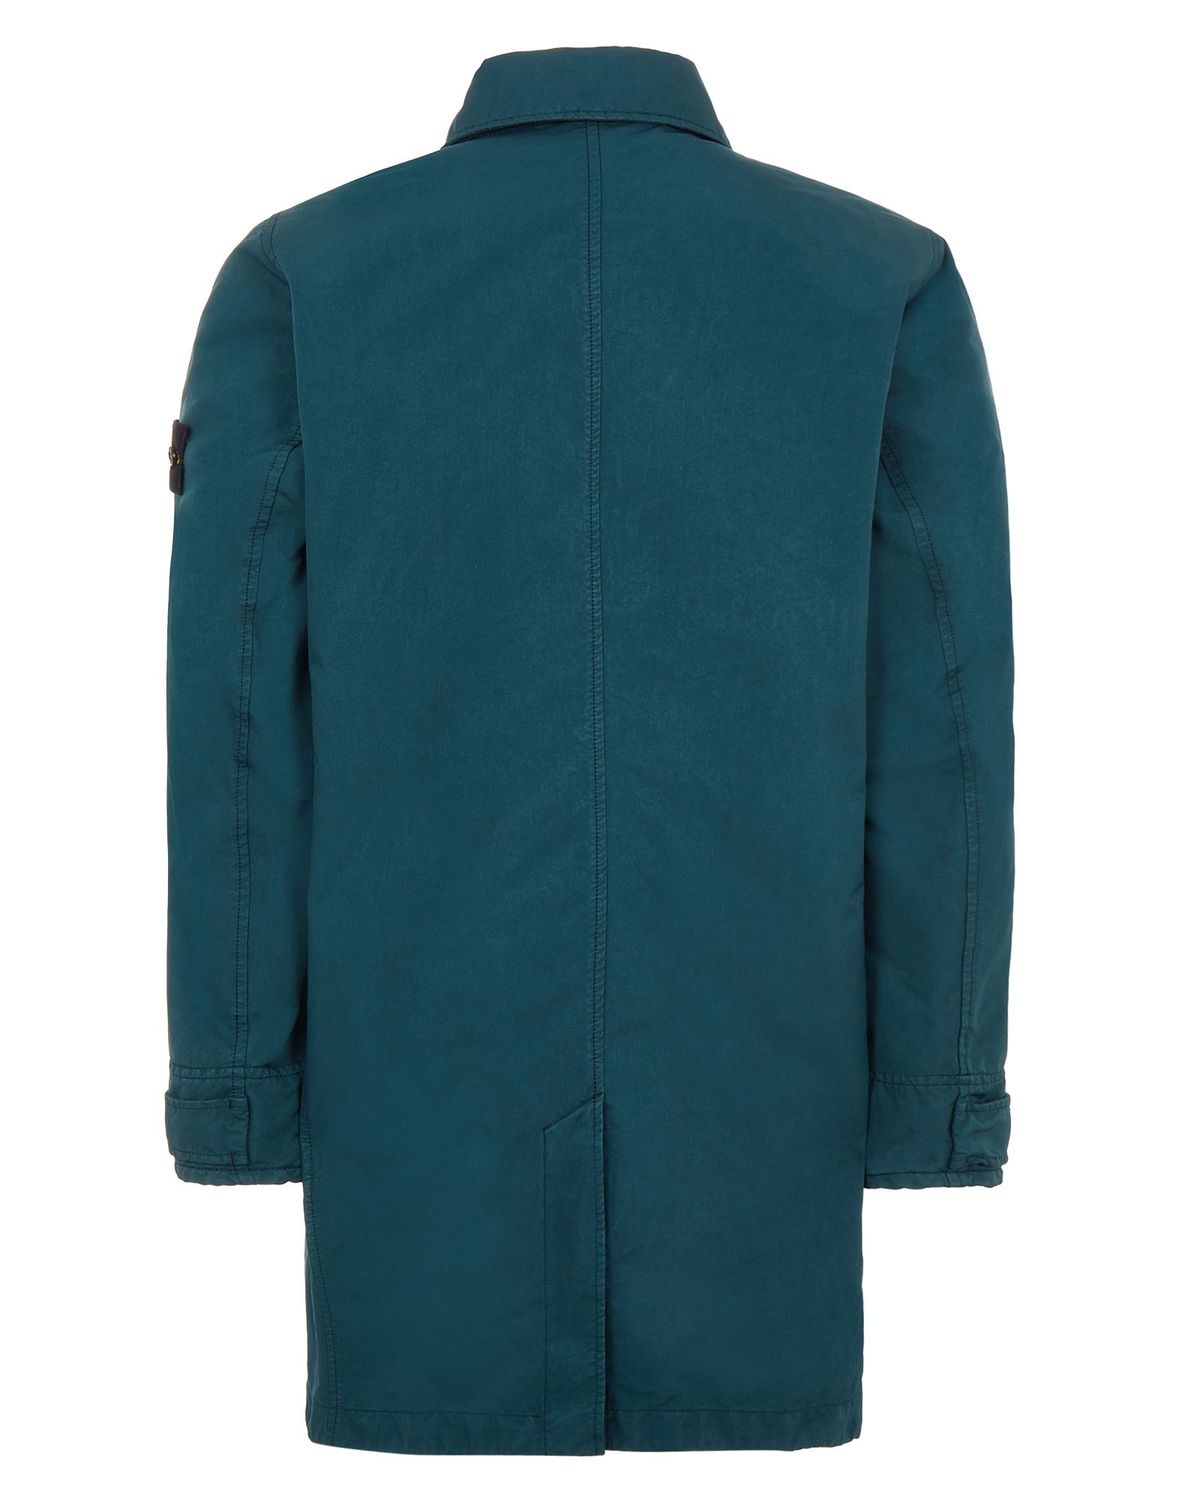 Men's FW22 Outerwear in V0057 Color by STONE ISLAND